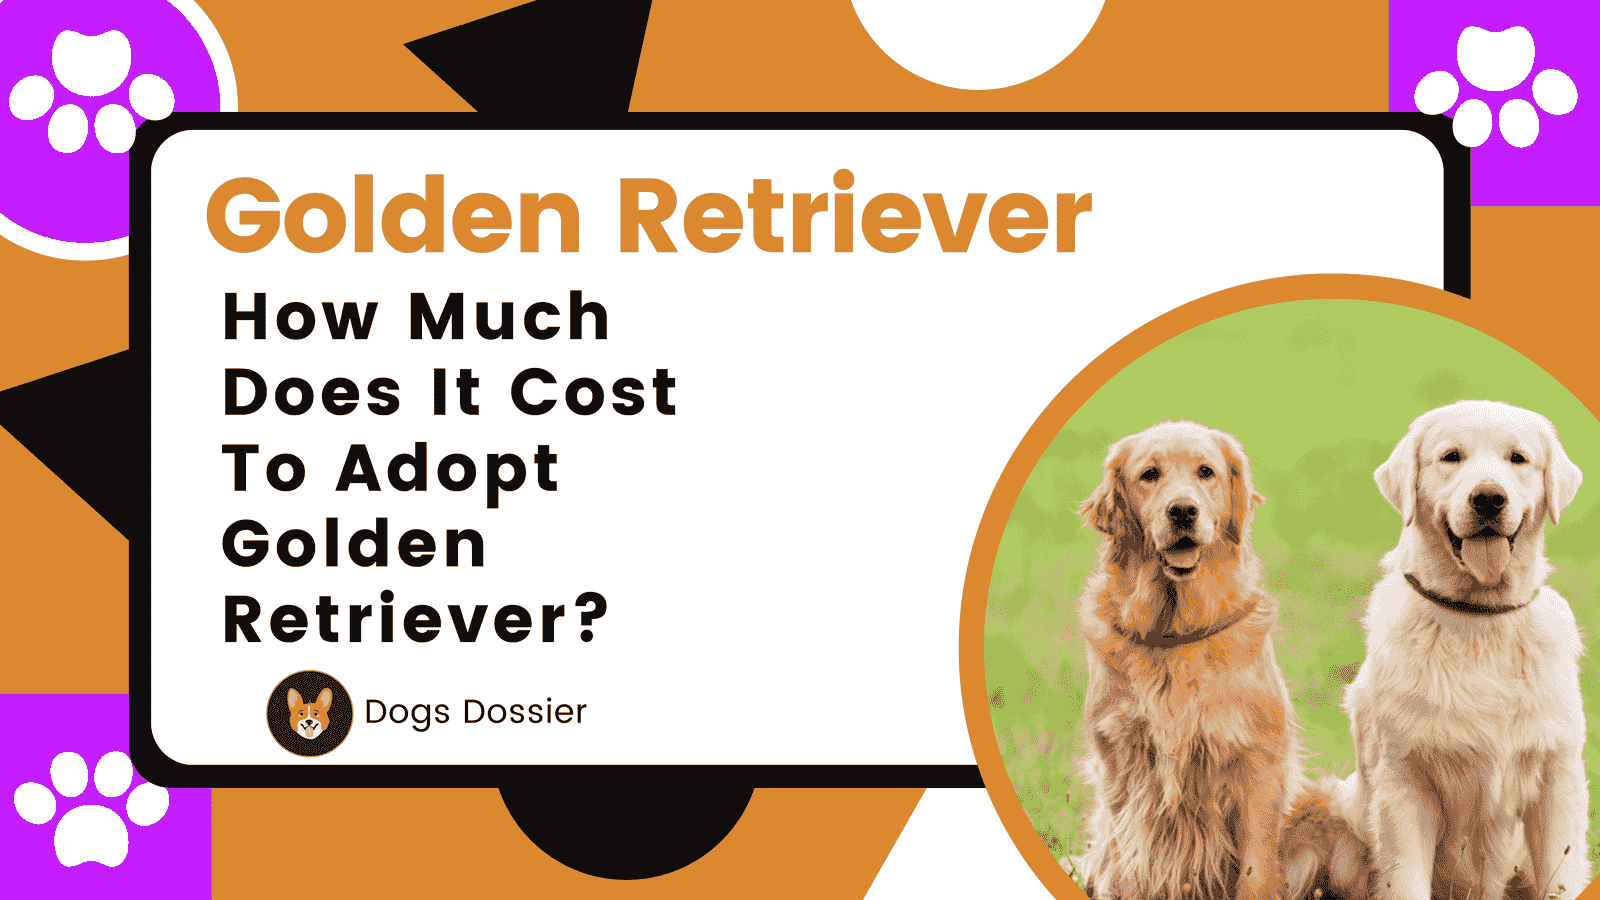 How Much Does It Cost to Adopt a Golden Retriever?